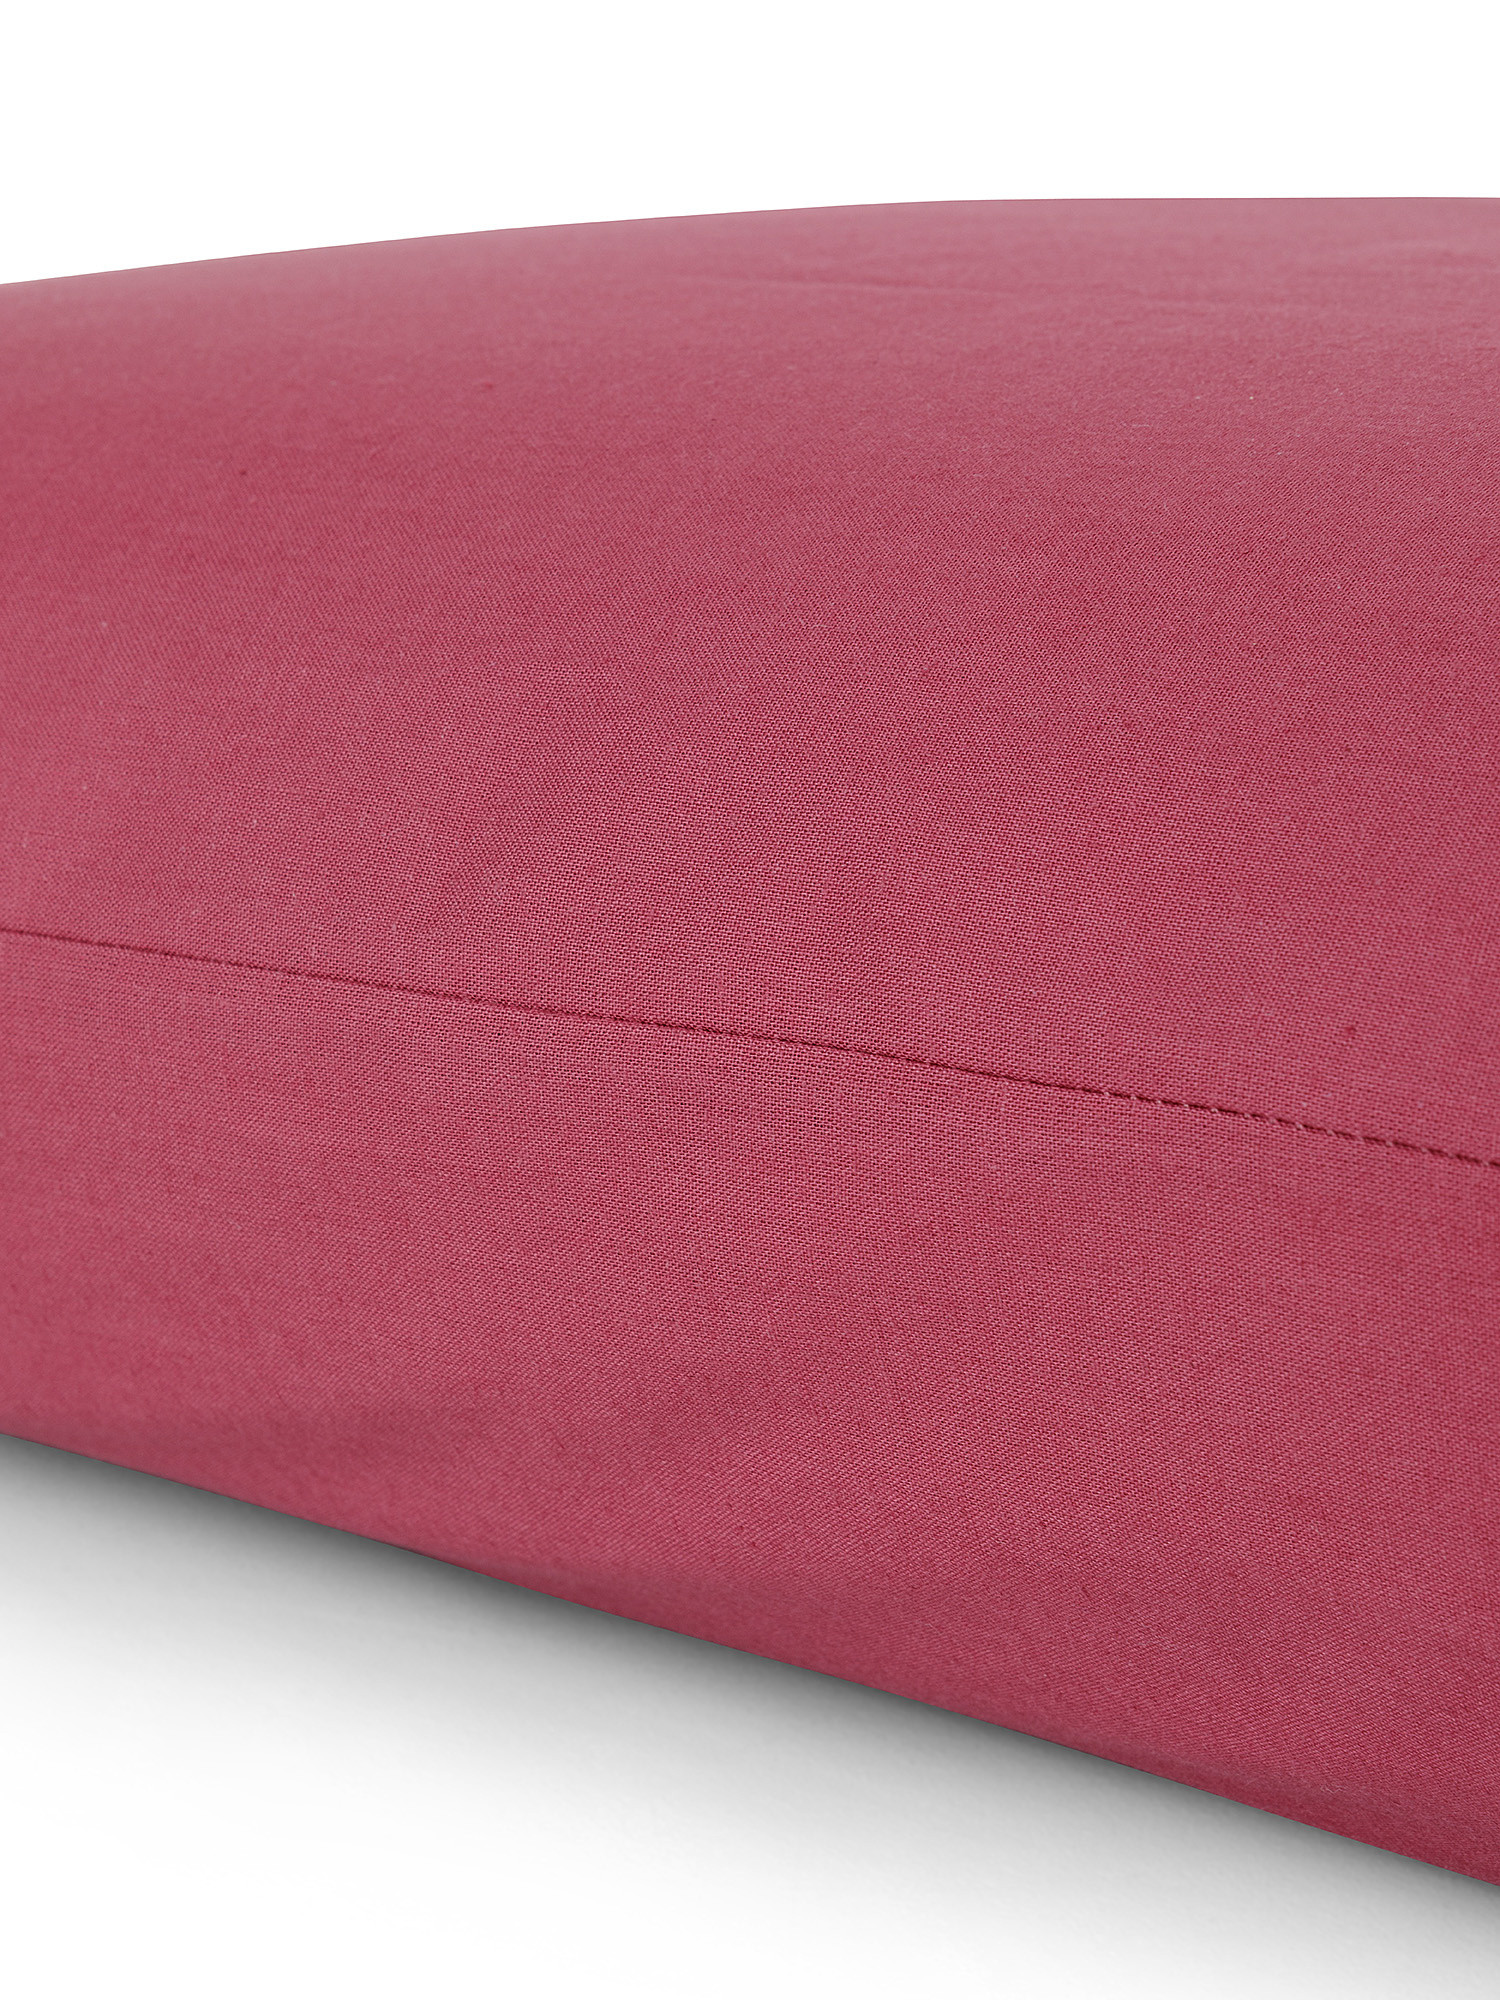 Solid color 100% cotton pillowcase, Red, large image number 1